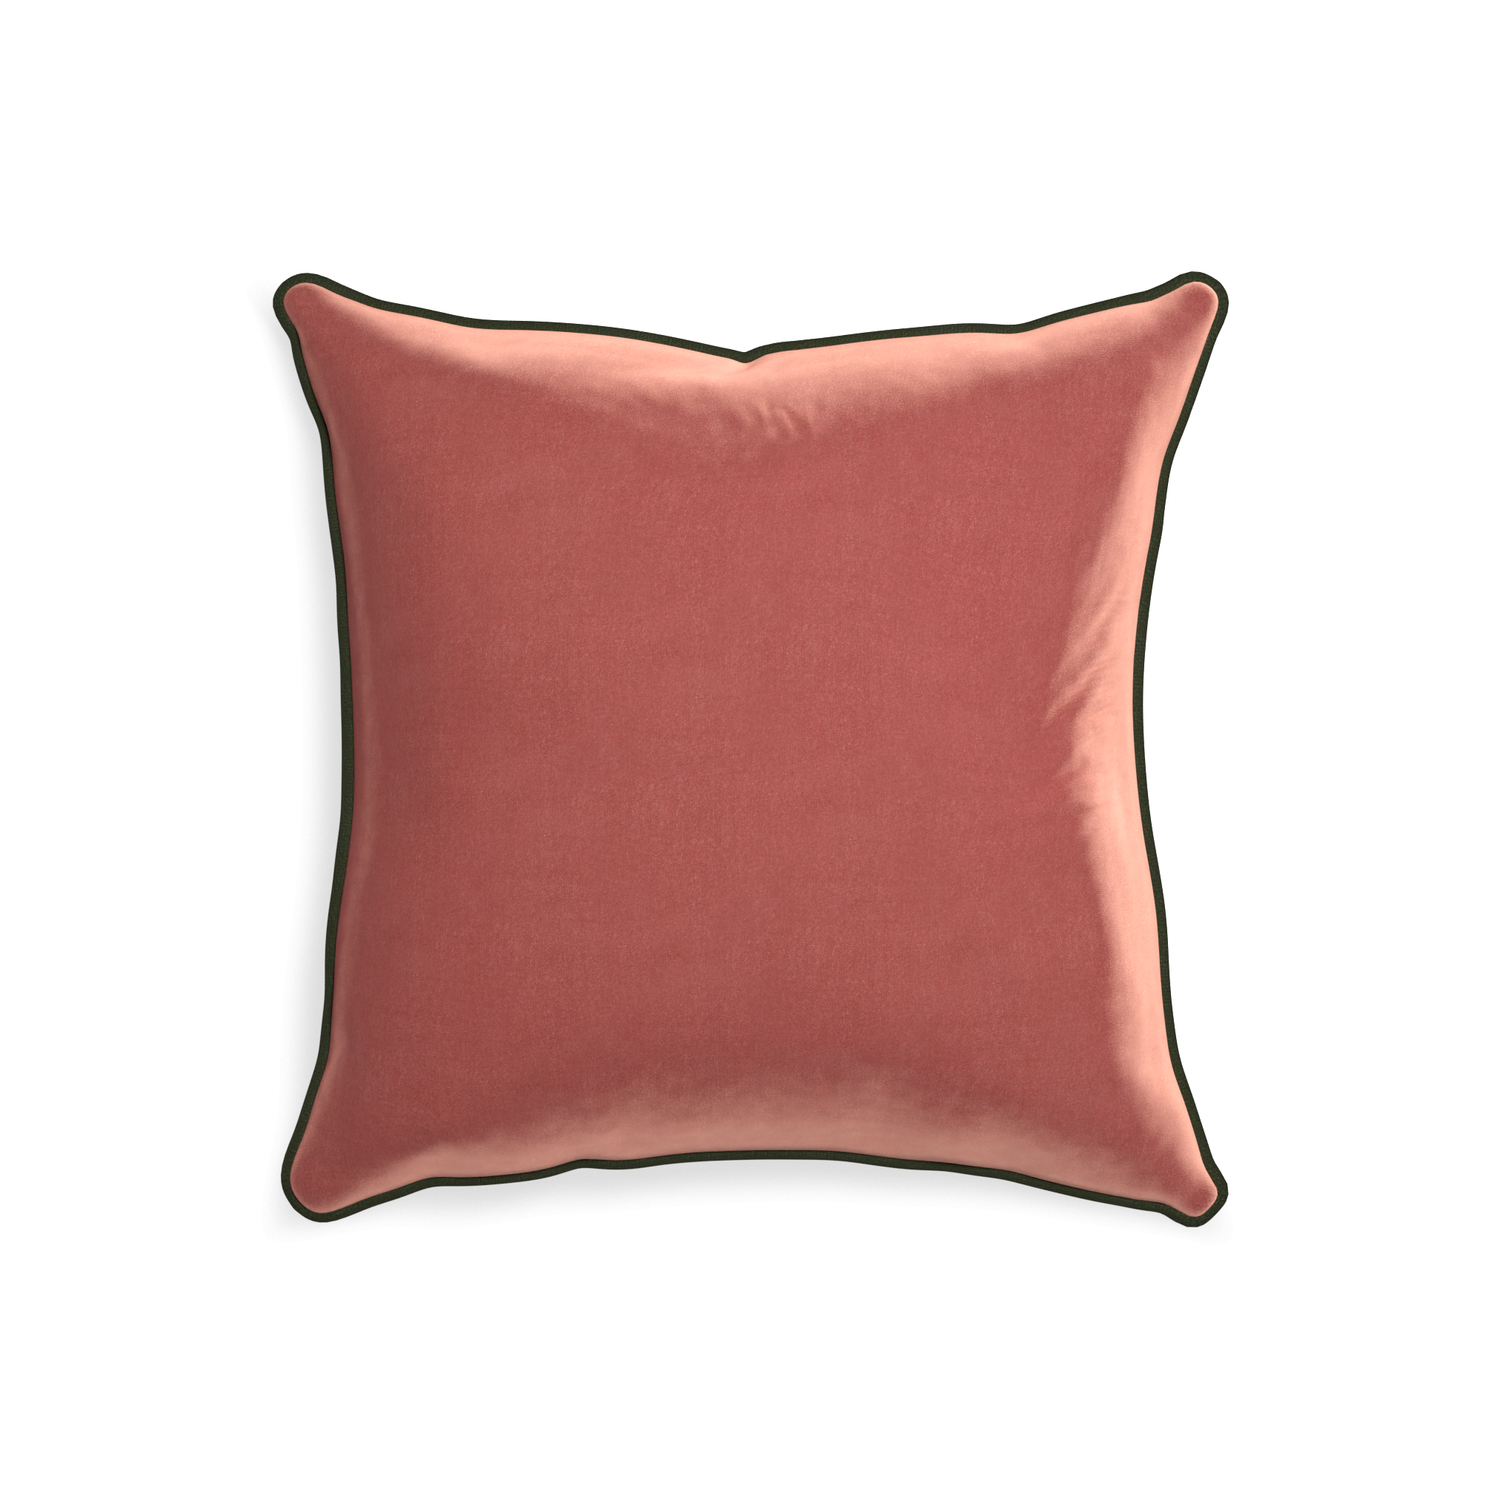 20-square cosmo velvet custom coralpillow with f piping on white background